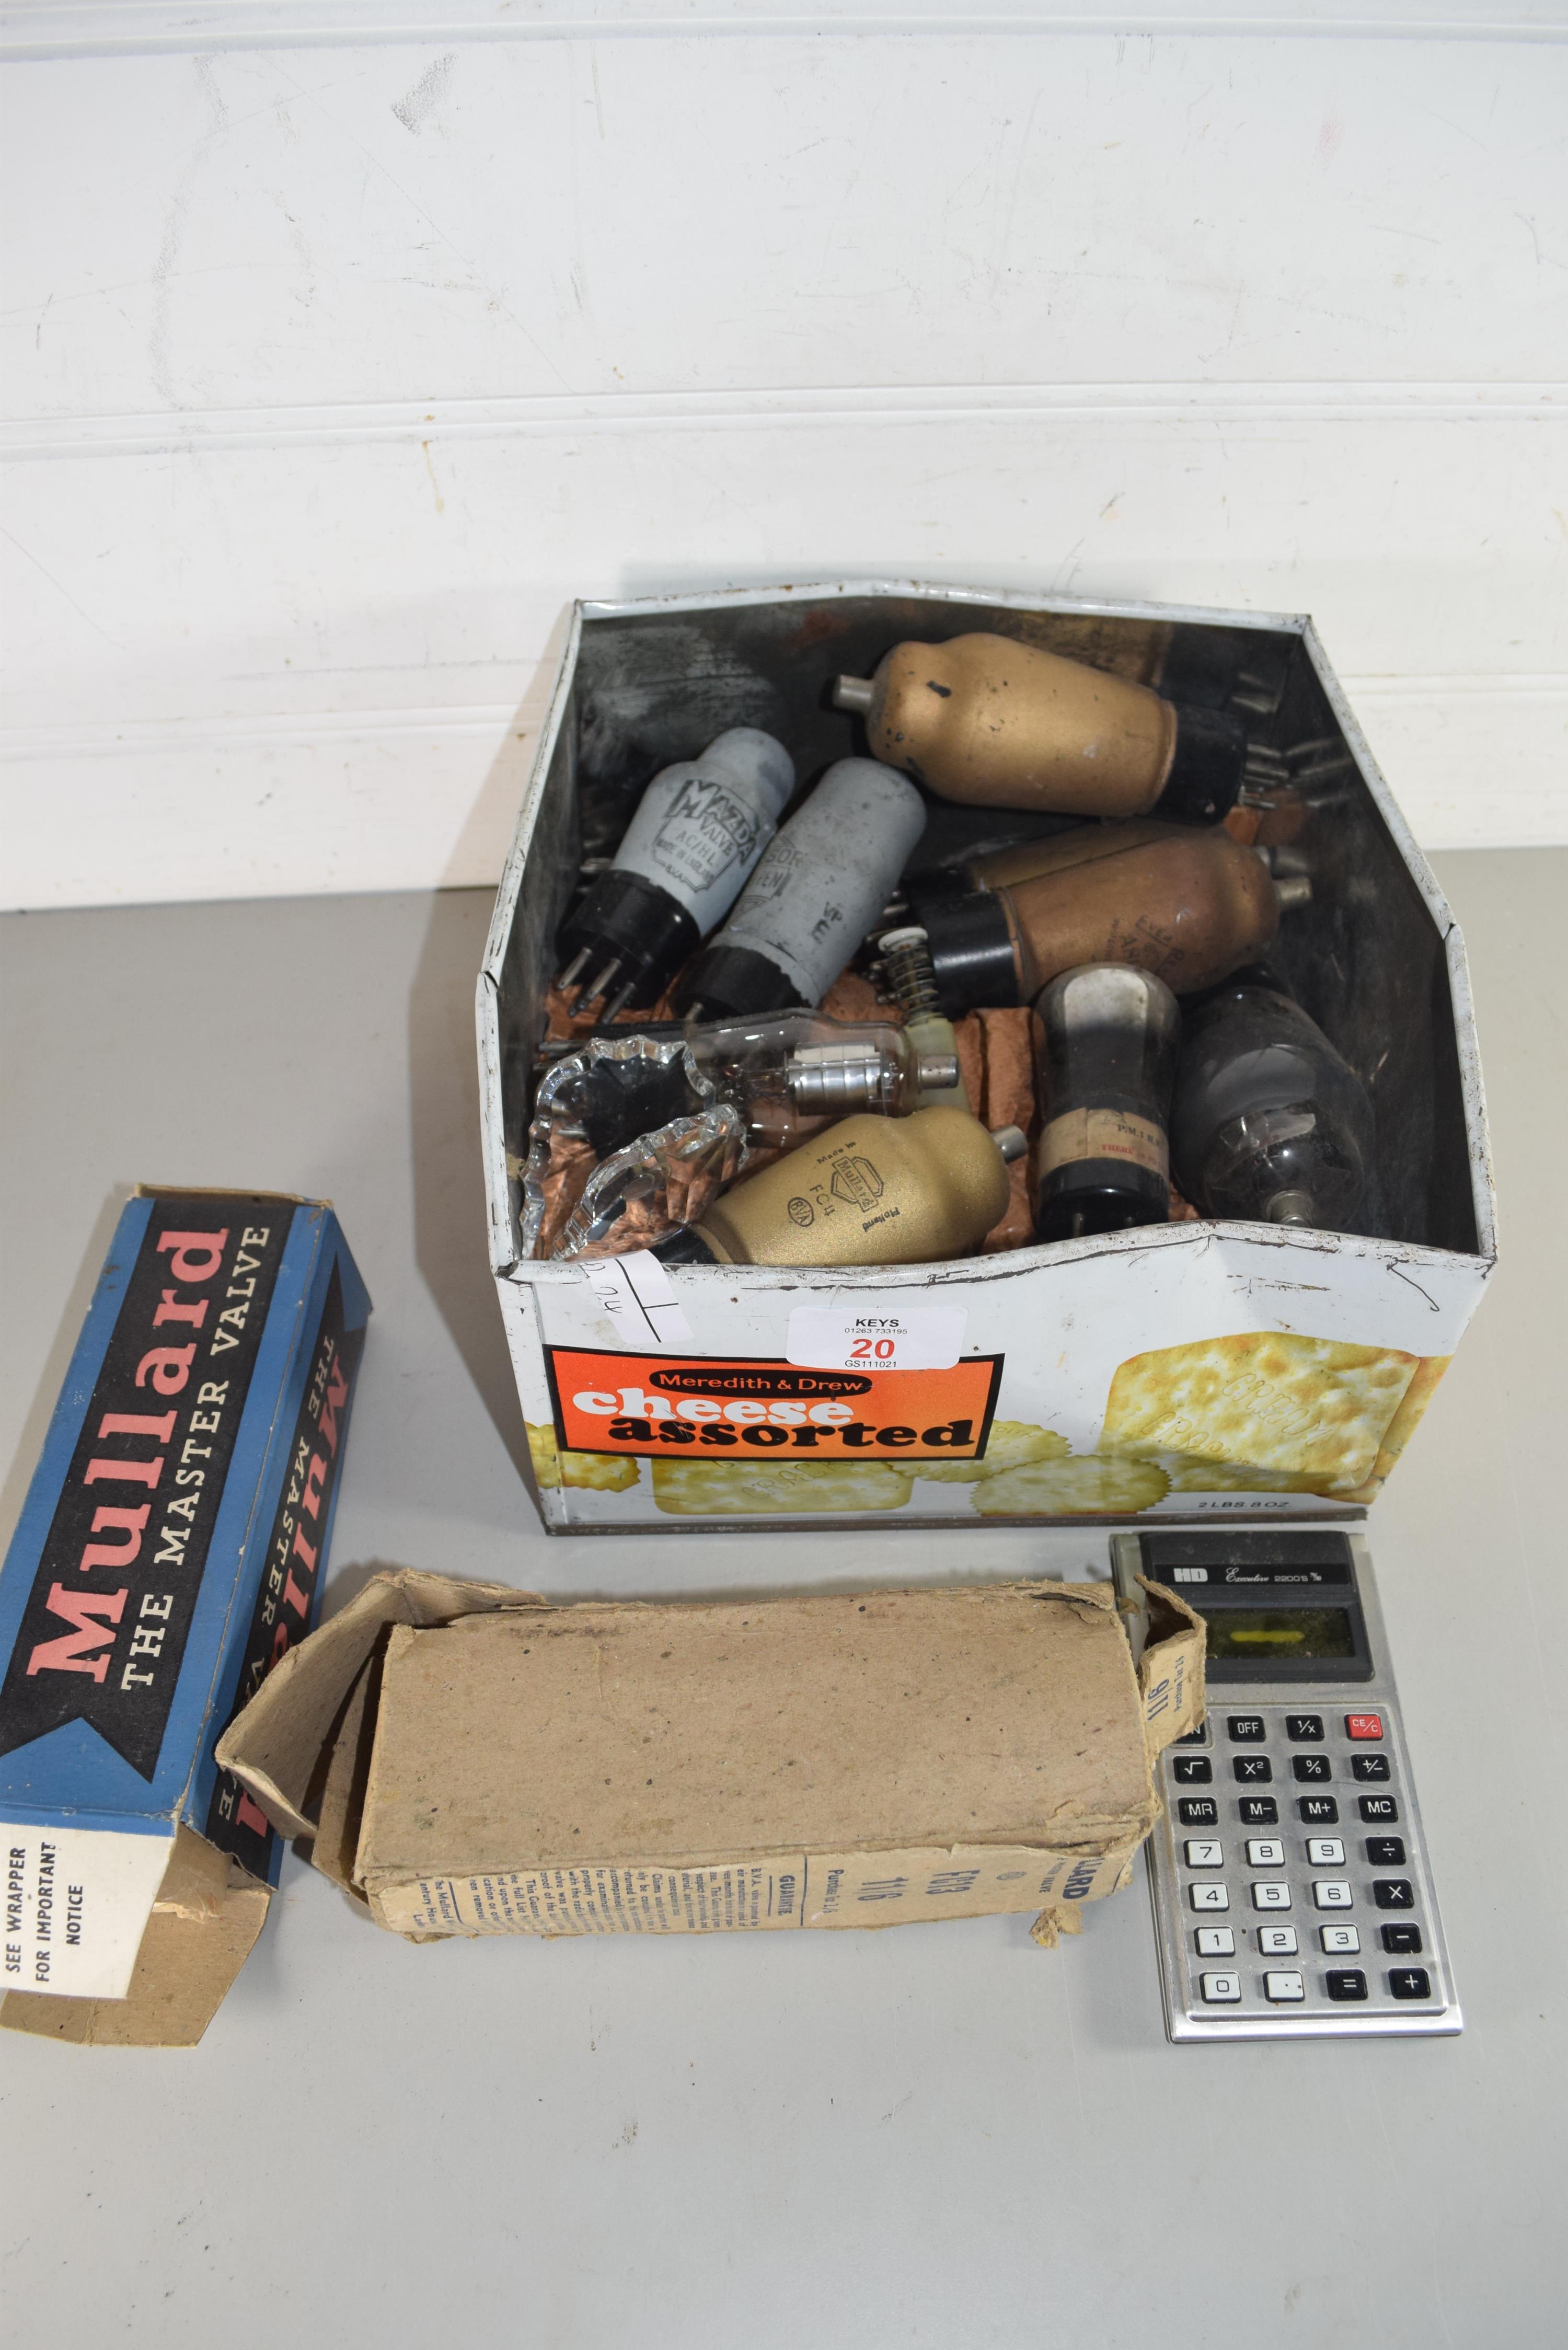 BOX OF VARIOUS VINTAGE ELECTRIC VALVES TO INCLUDE MAZDA AND MULLARD